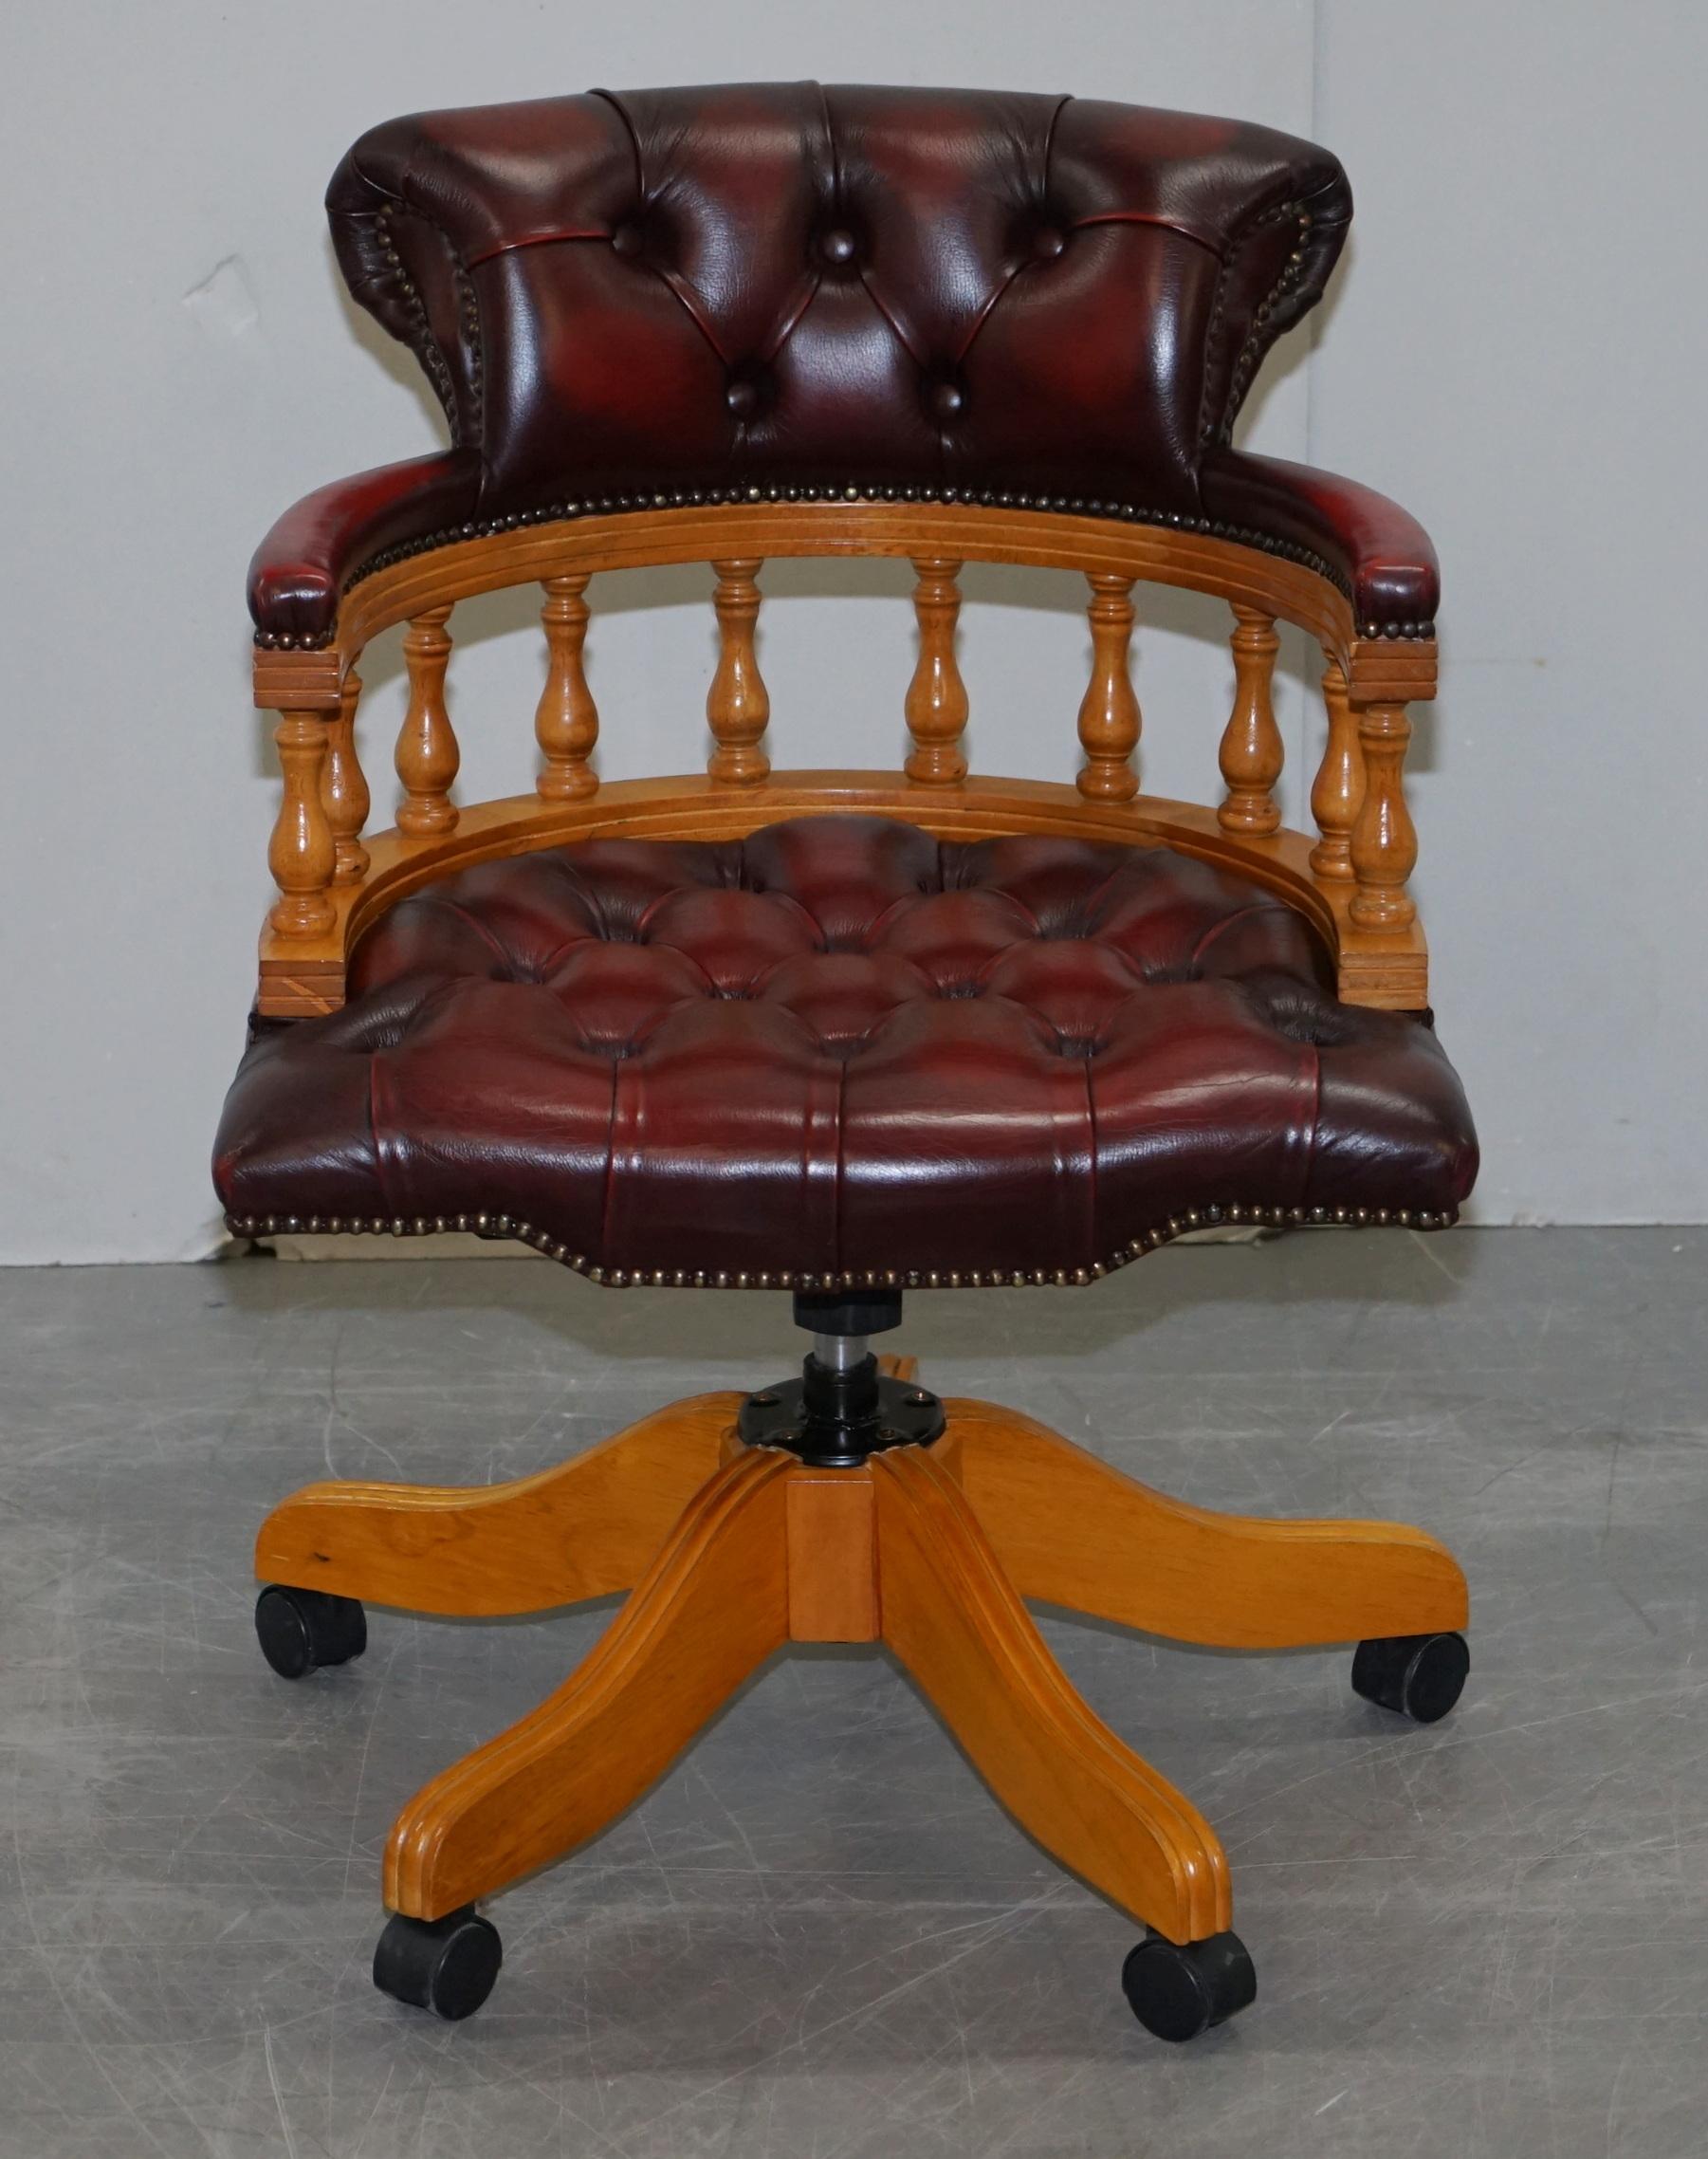 I am delighted to offer for sale this lovely hand made Chesterfield fully buttoned Oxblood leather Captains or Directors armchair

A good looking well made and decorative captains chair, it has a light beech wood frame with a yew finish and